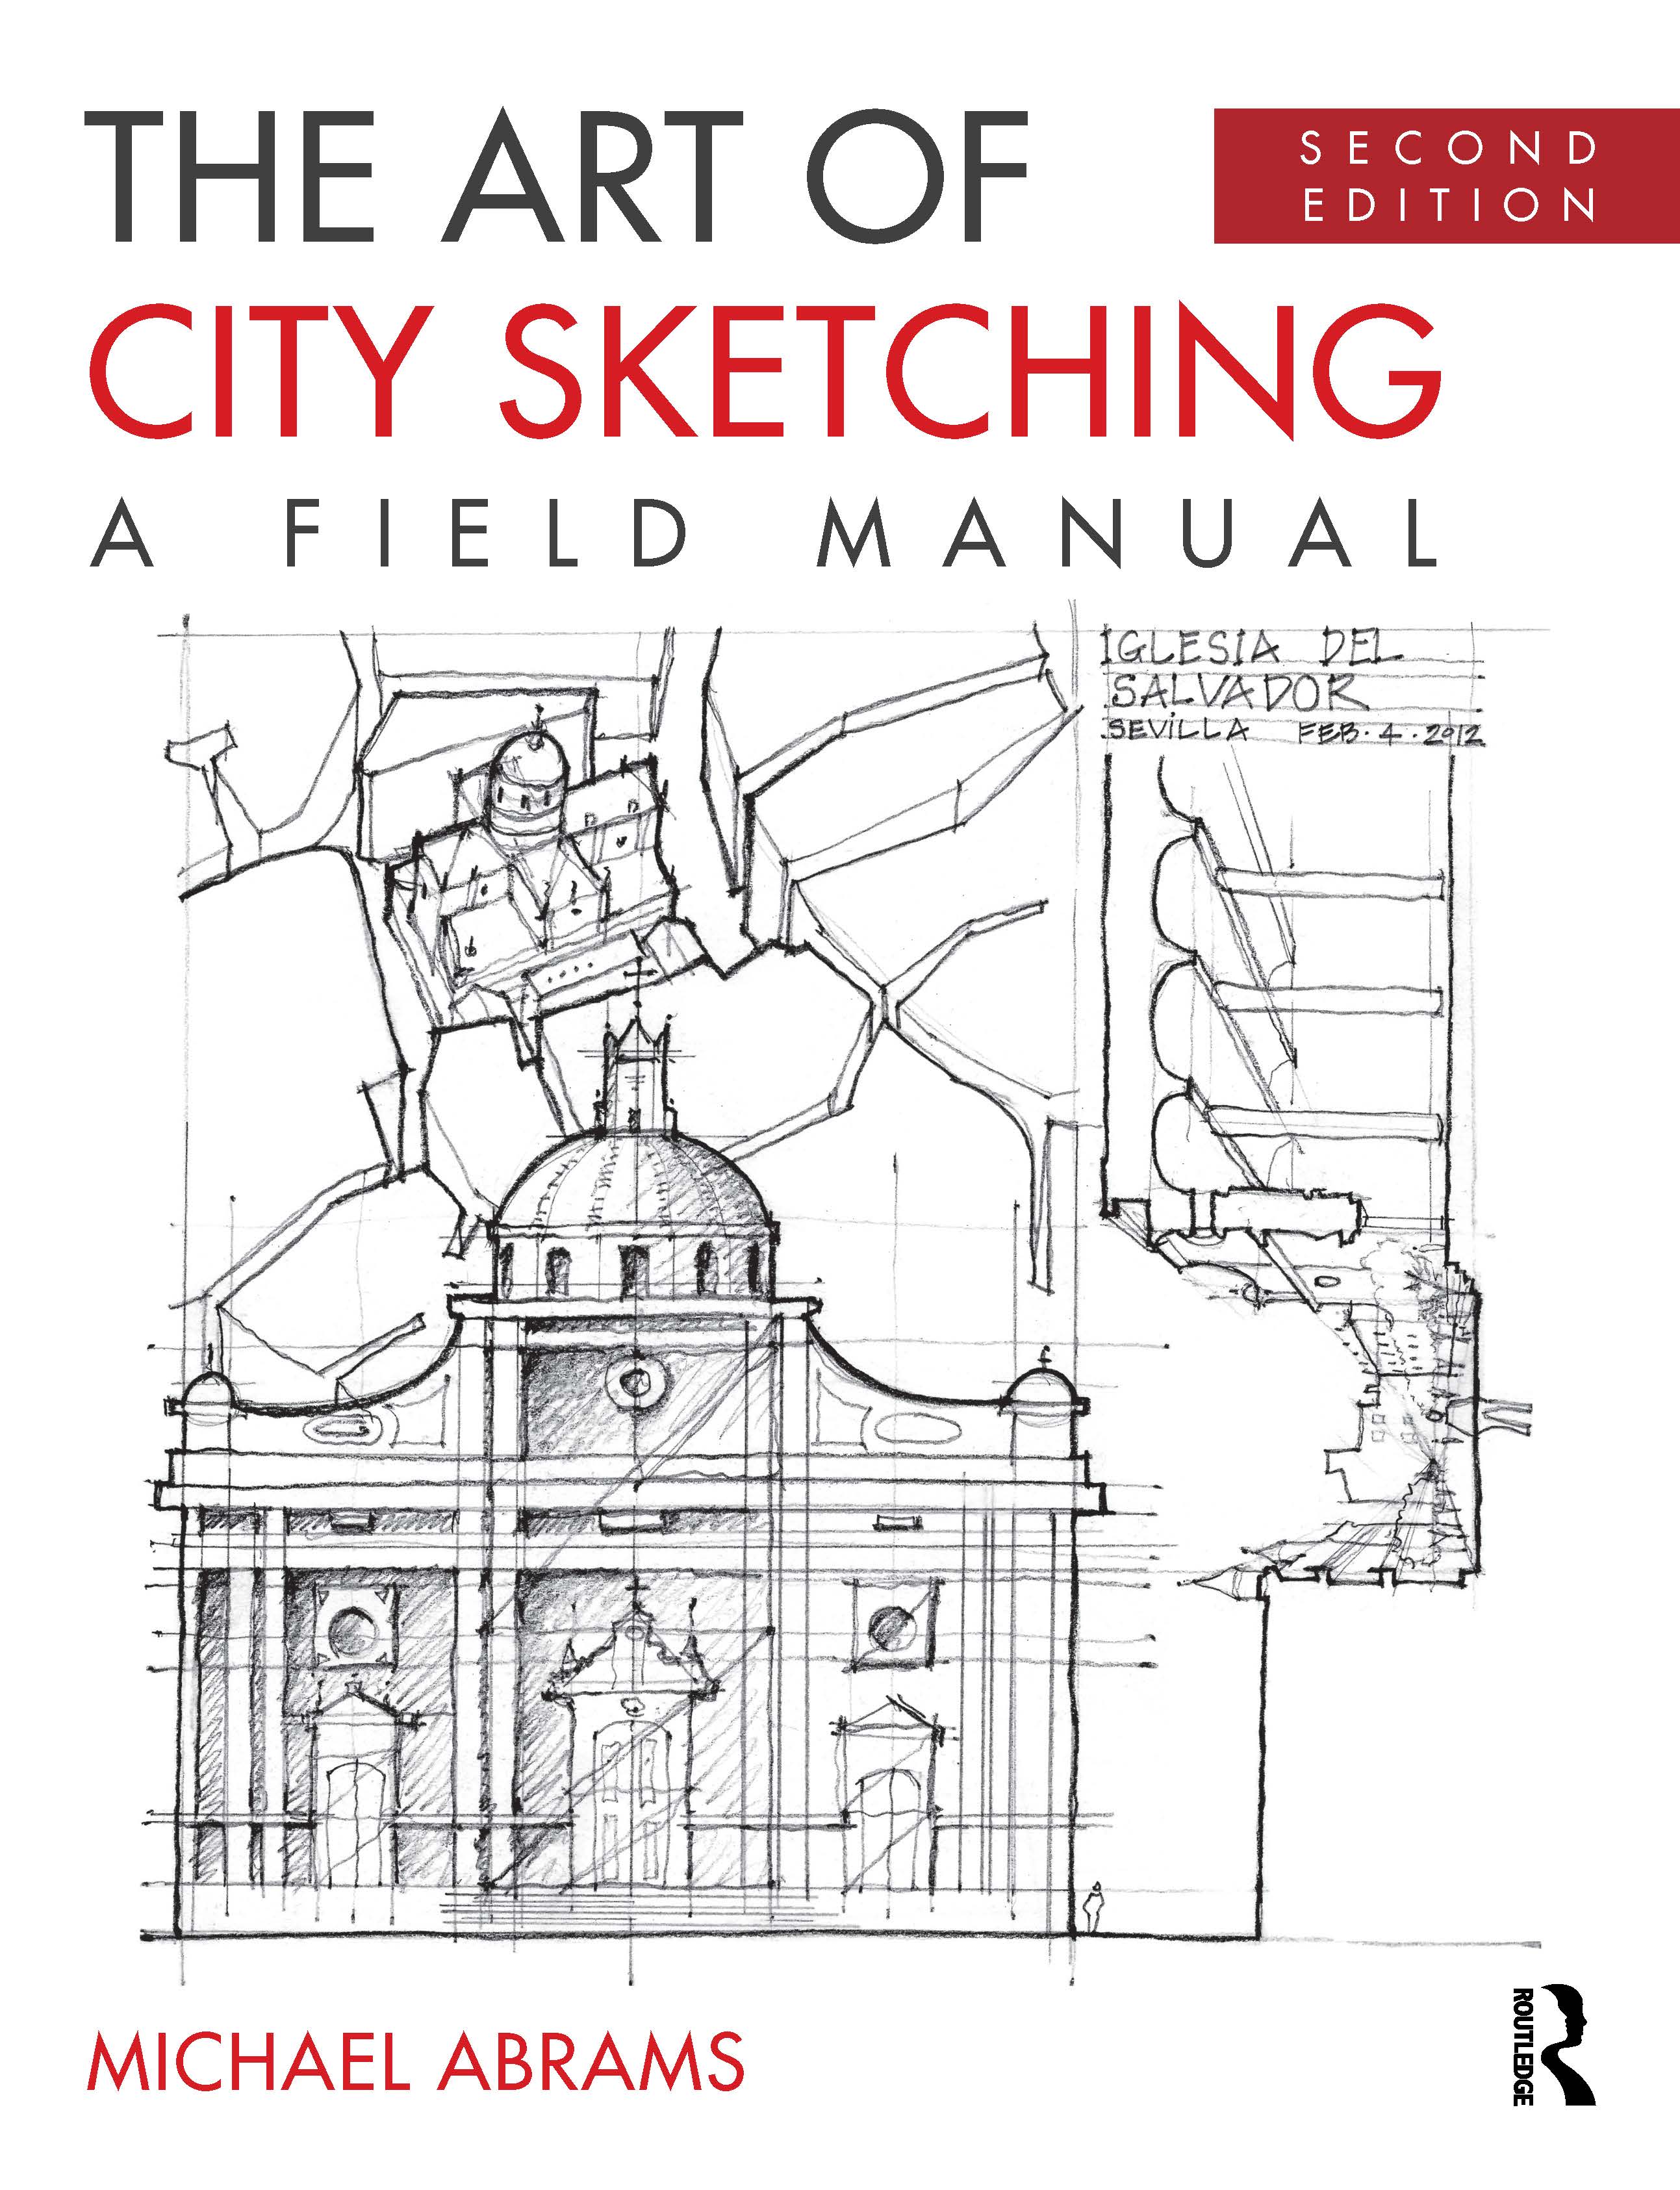 The Art of Sketching, Michael Abram's book cover